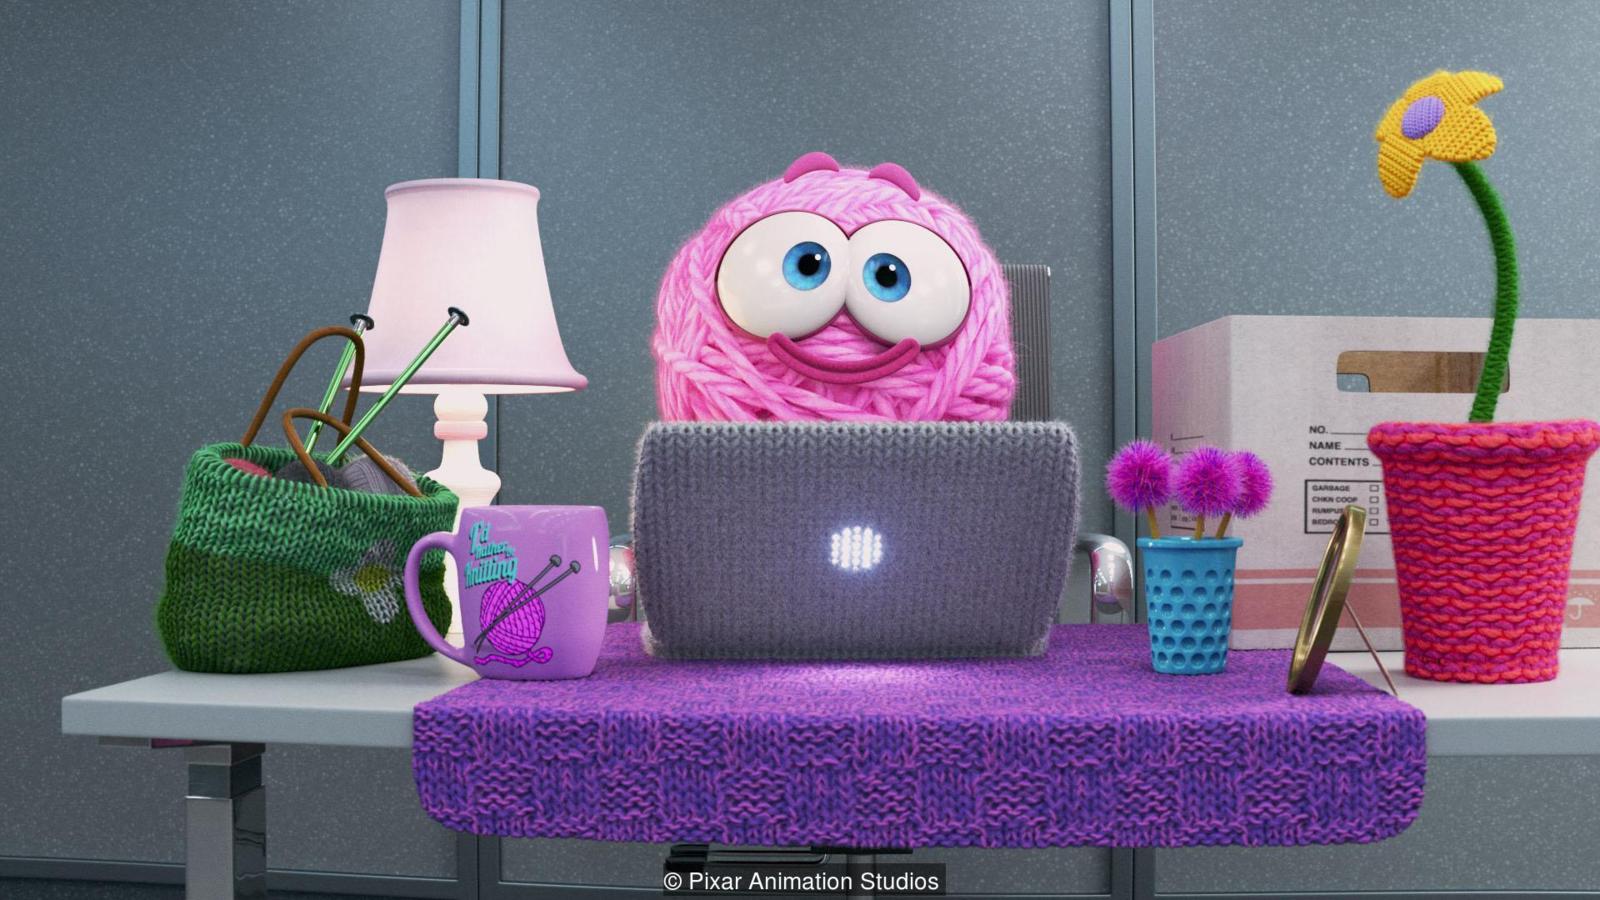 Eventually I just got tired of trying to find images to match the theme. Here, have a yarn ball at a laptop.